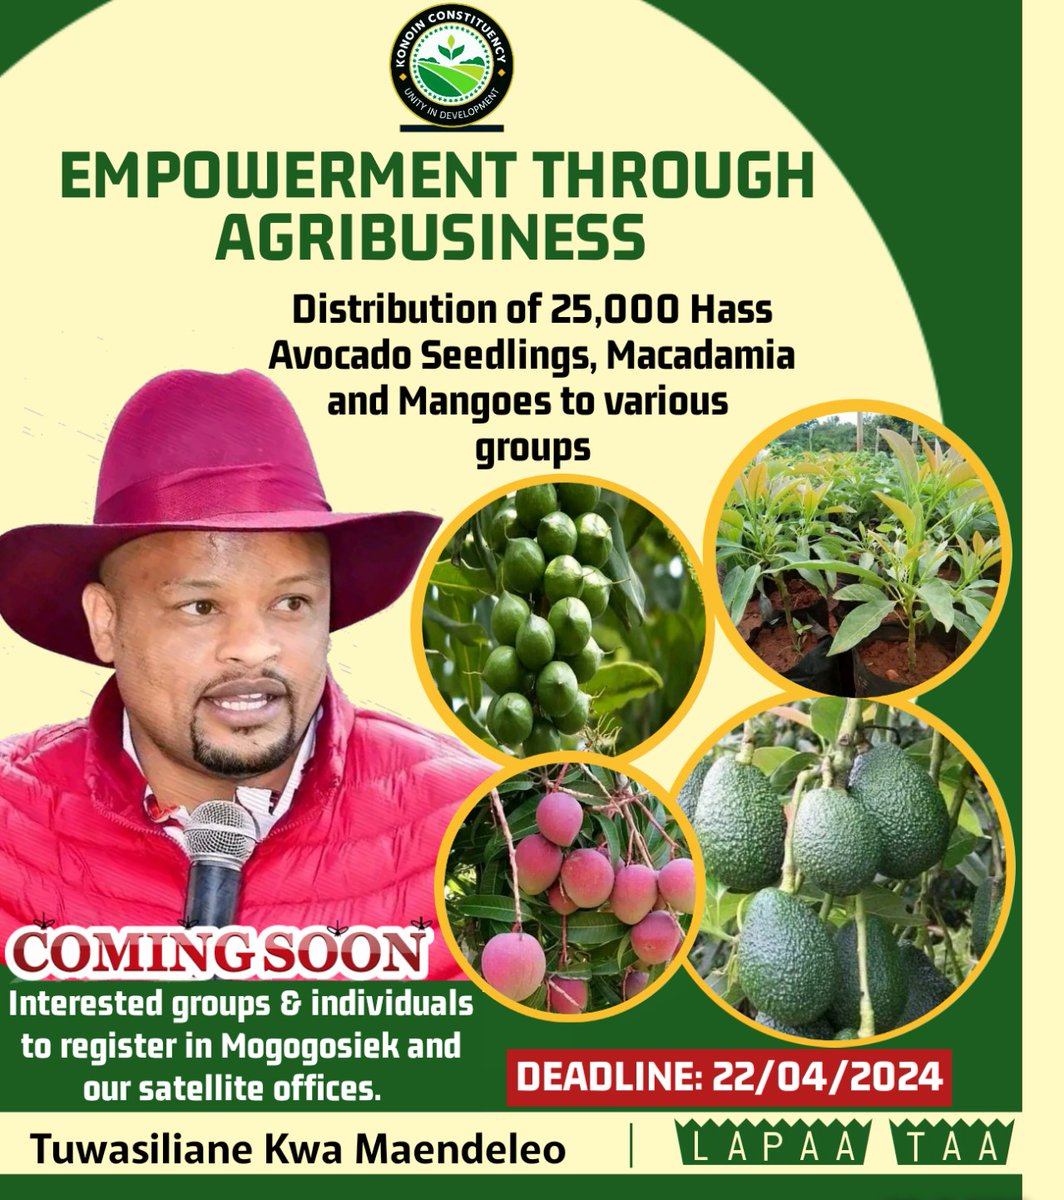 EMPOWERMENT THROUGH AGRIBUSINESS.
I call upon the residents of Konoin who are interested with Hass Avocado seedlings, Macadamia or Mangoes to register himself/herself or group in any of our Constituency offices accross all the wards. 
#TuwasilianeKwaMaendeleo 
Lapaa Taa